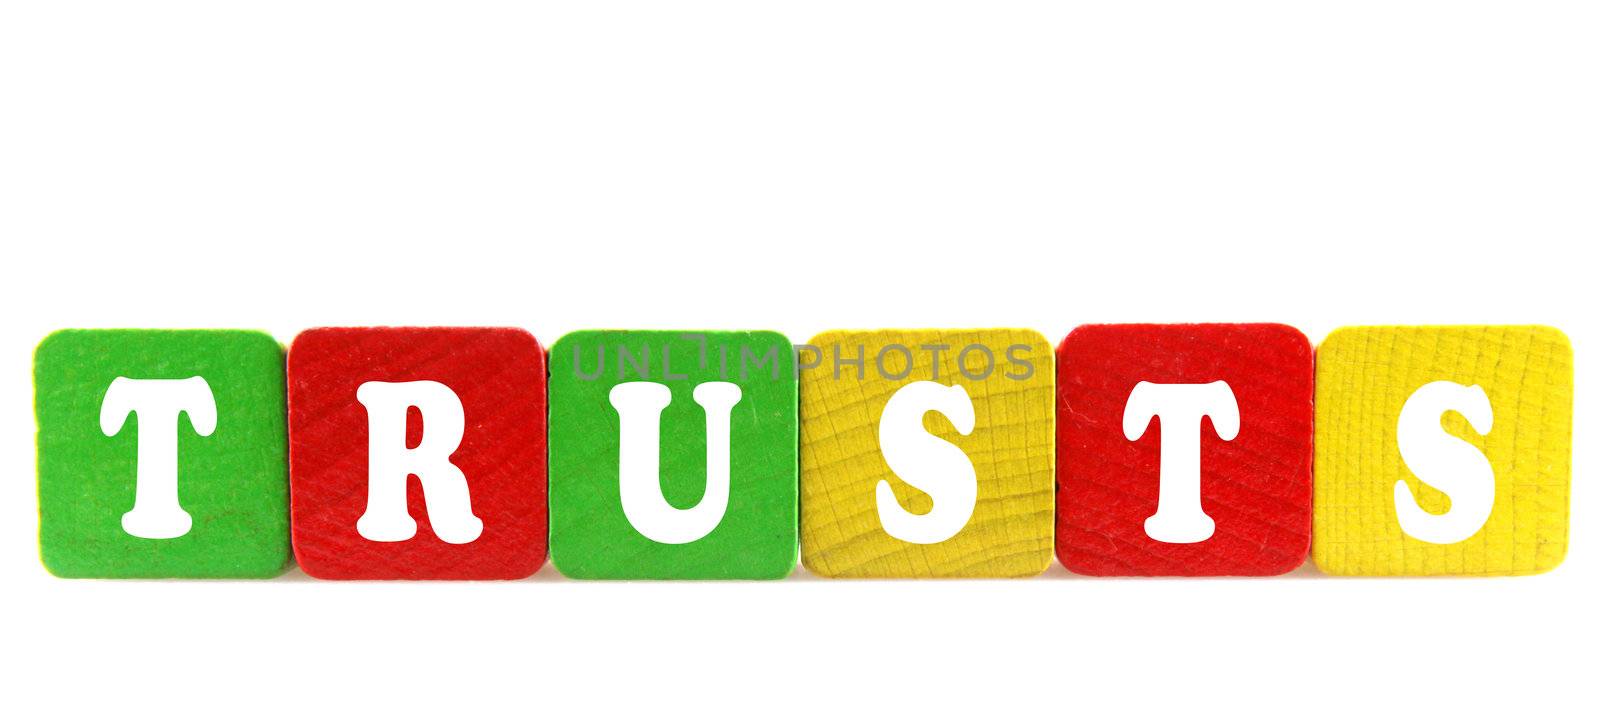 trusts - isolated text in wooden building blocks